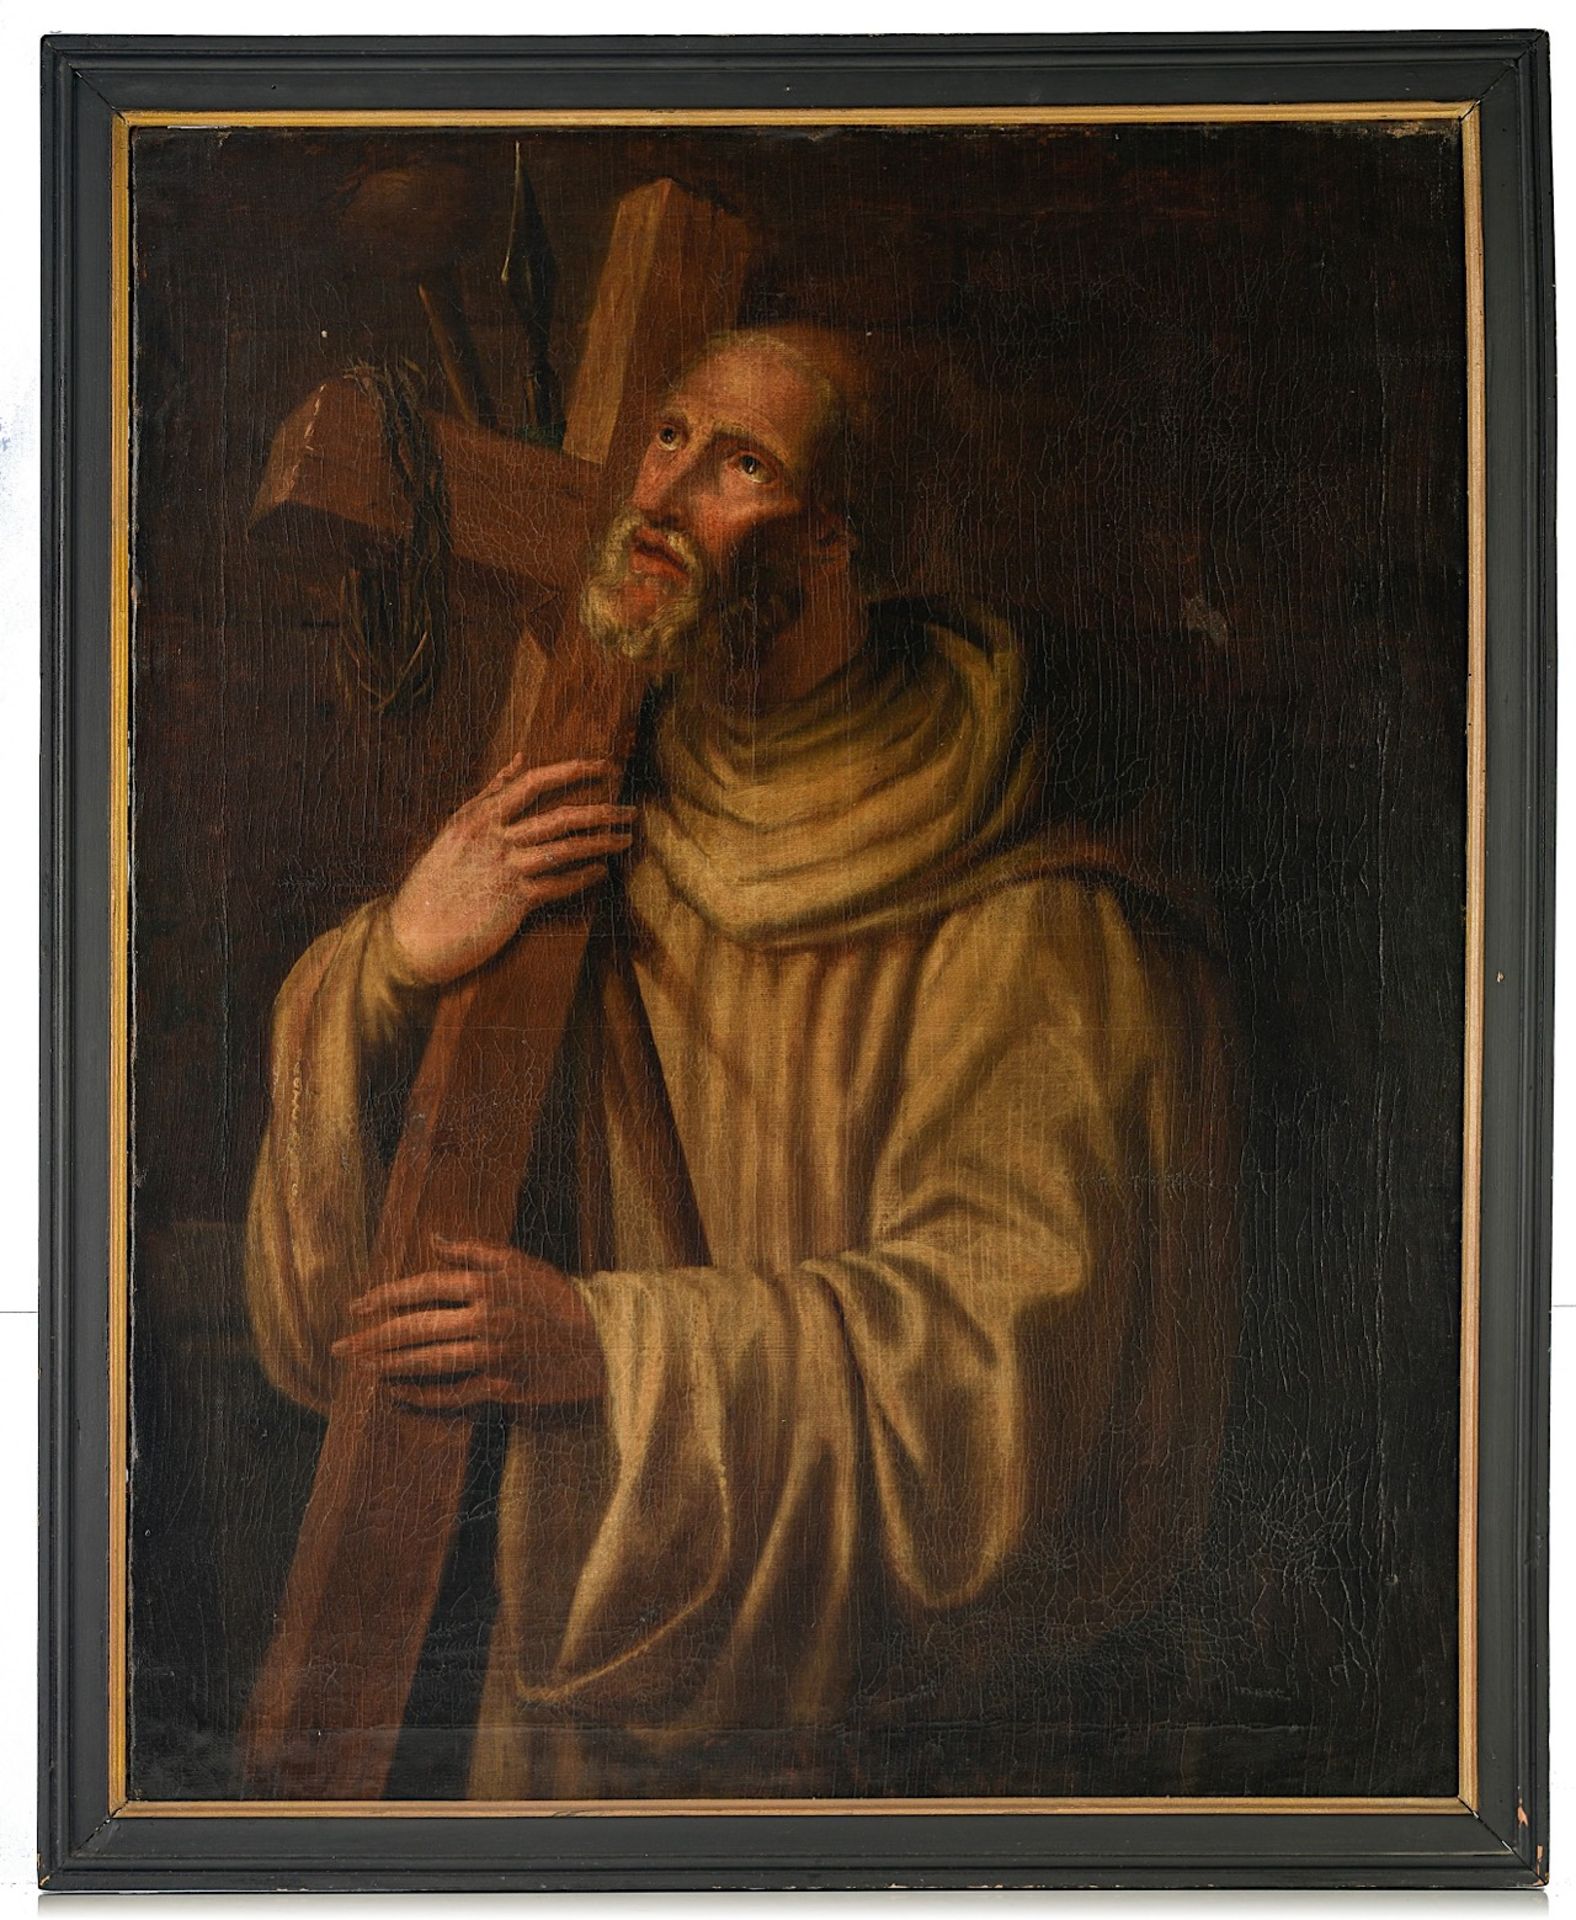 A Friar Minor depicted as a martyr, 17thC, oil on canvas, 80 x 100 cm - Image 2 of 9